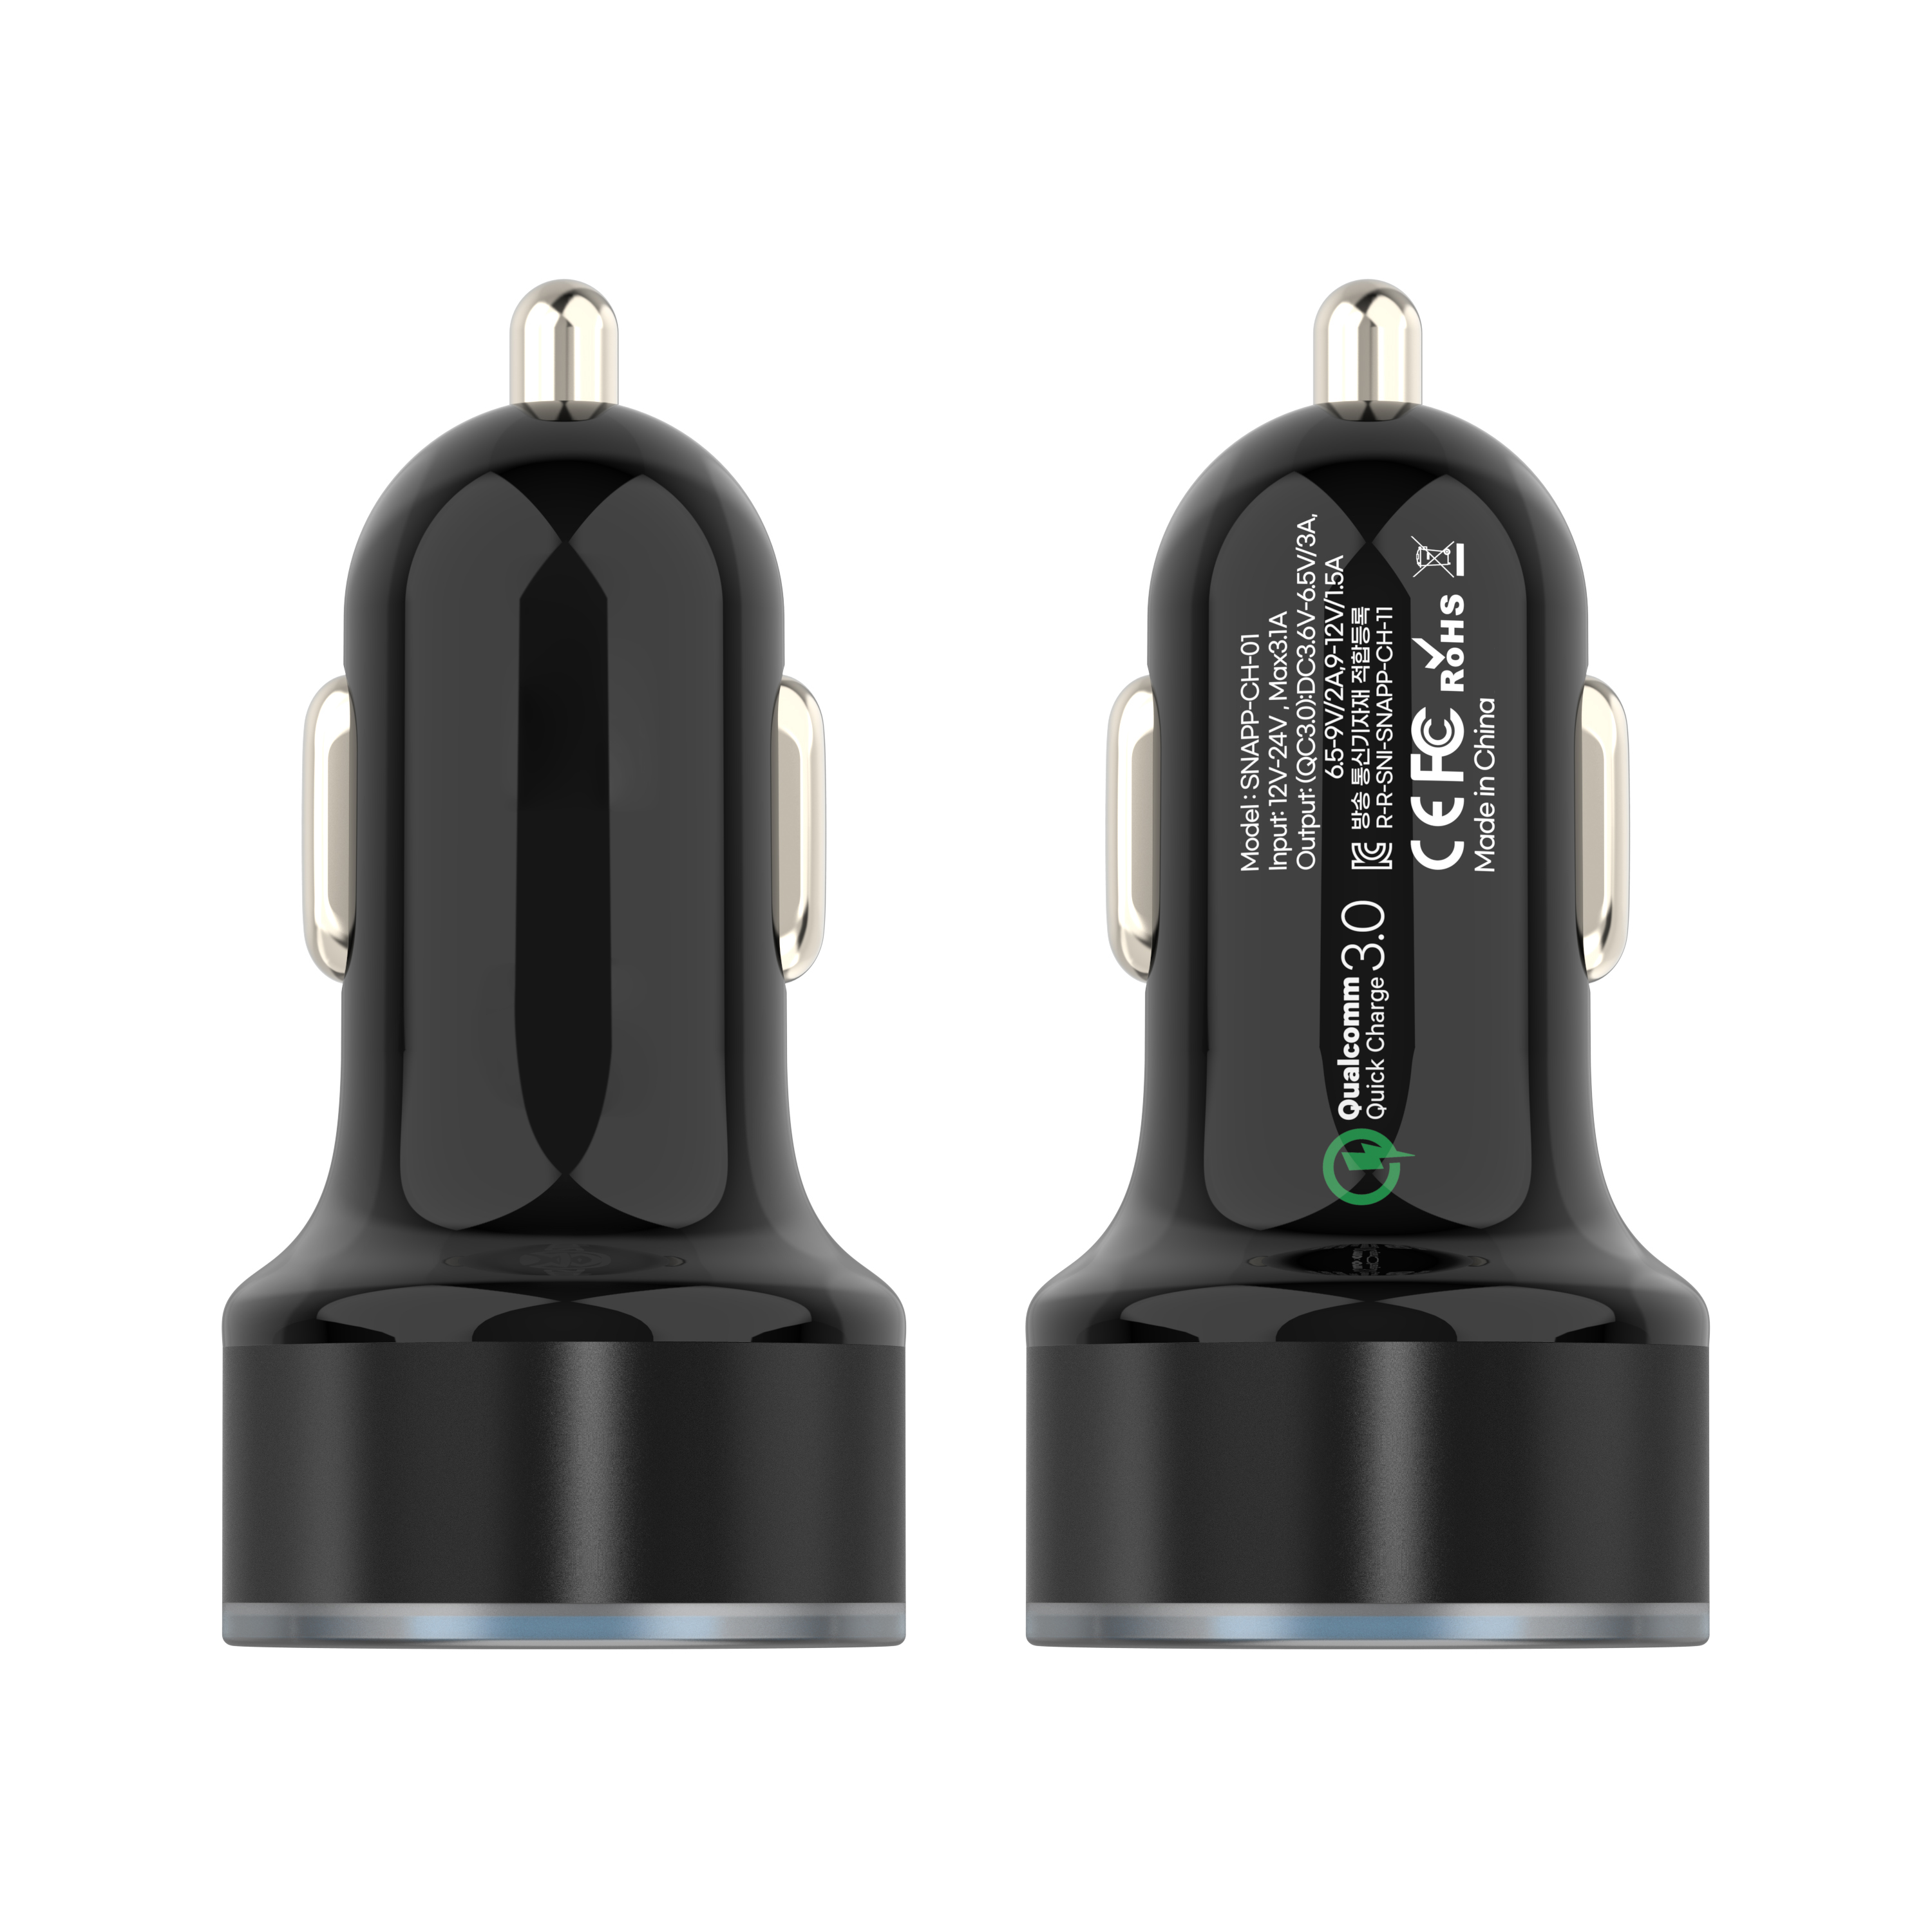 Double port QC3.0 car charger Manufacturers, Double port QC3.0 car charger Factory, Supply Double port QC3.0 car charger